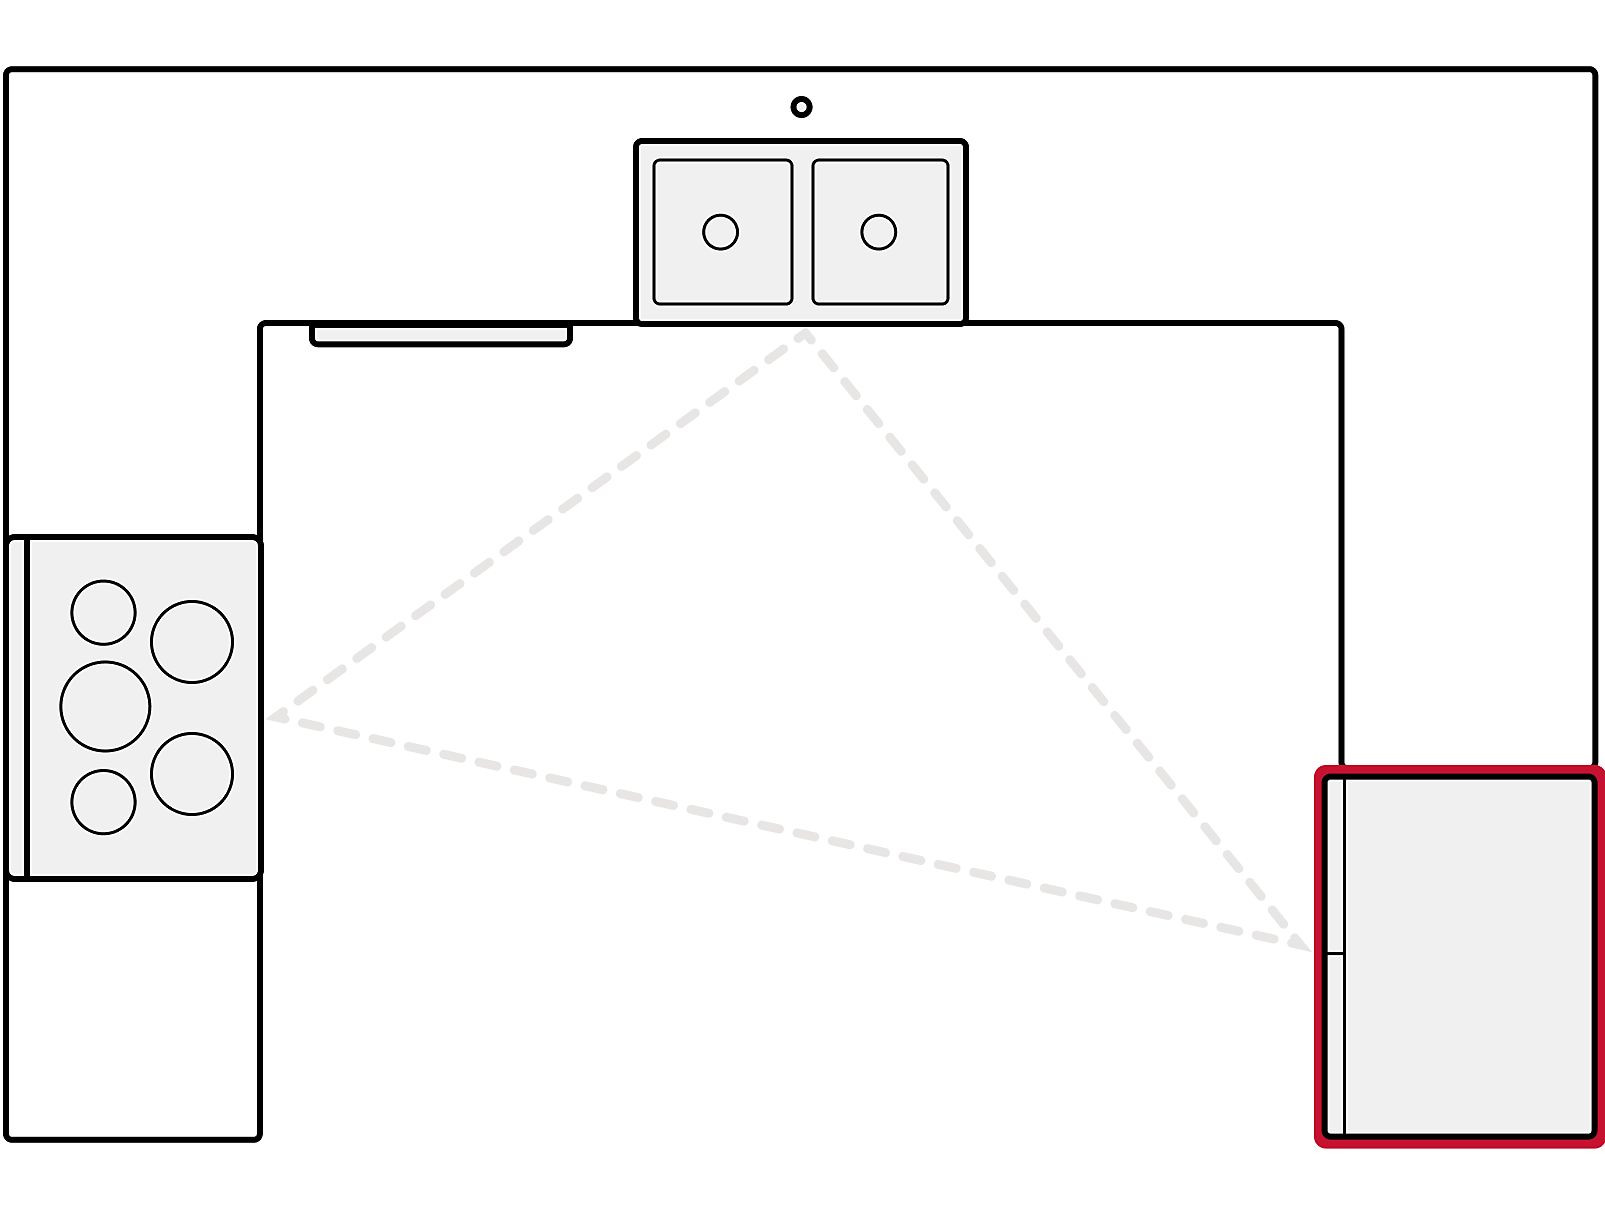 Diagram showing refrigerator placement in U-shaped kitchen